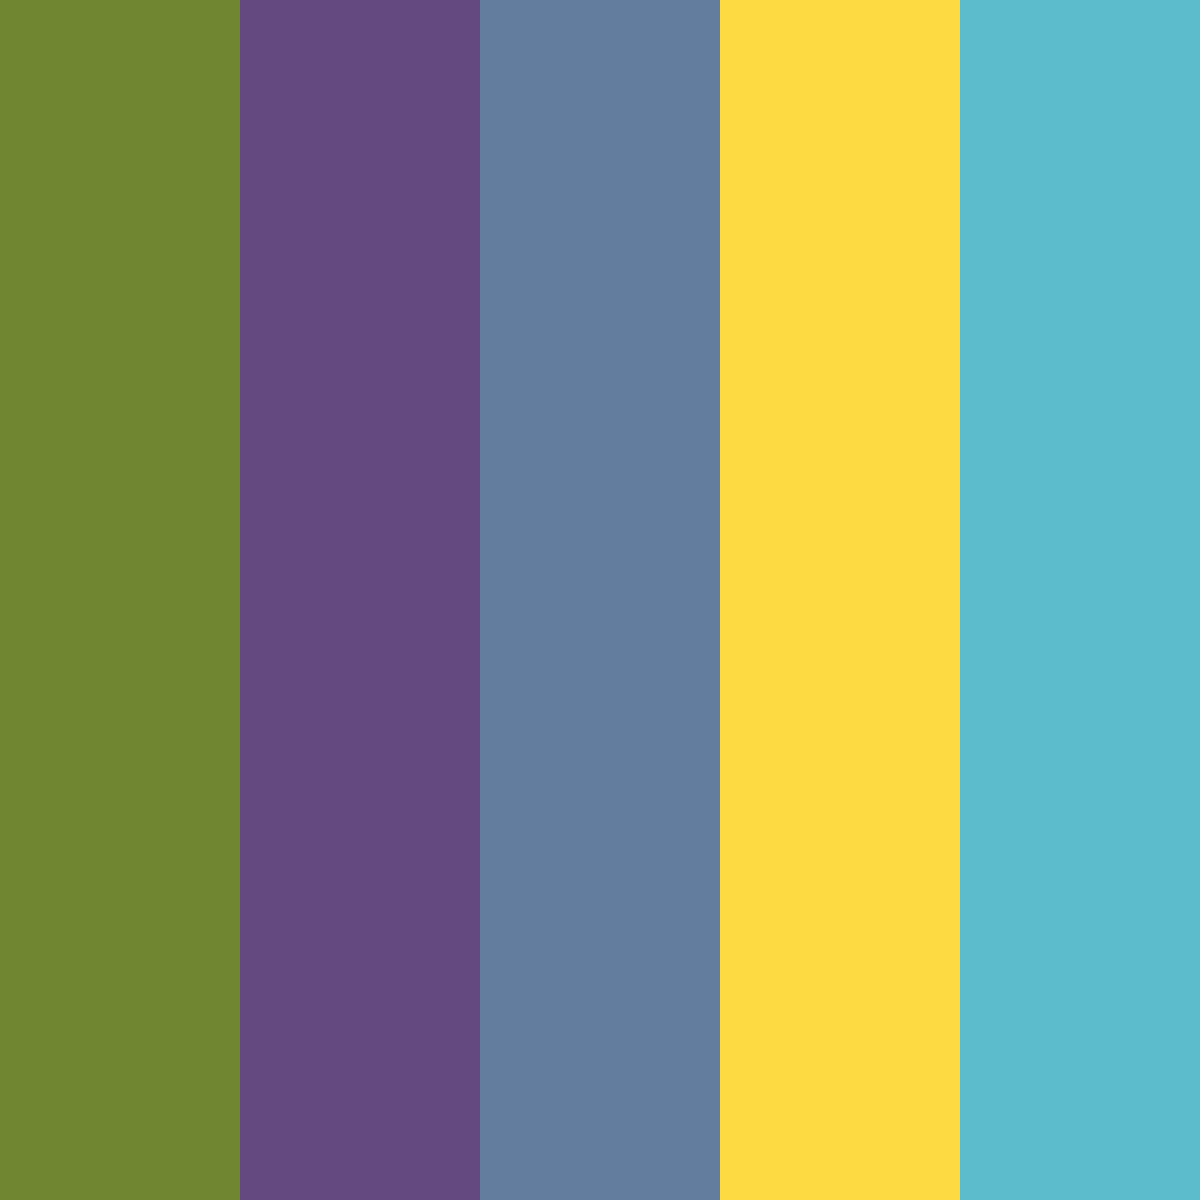 CoronaVirus Palette is a Color mix for the COVID-19